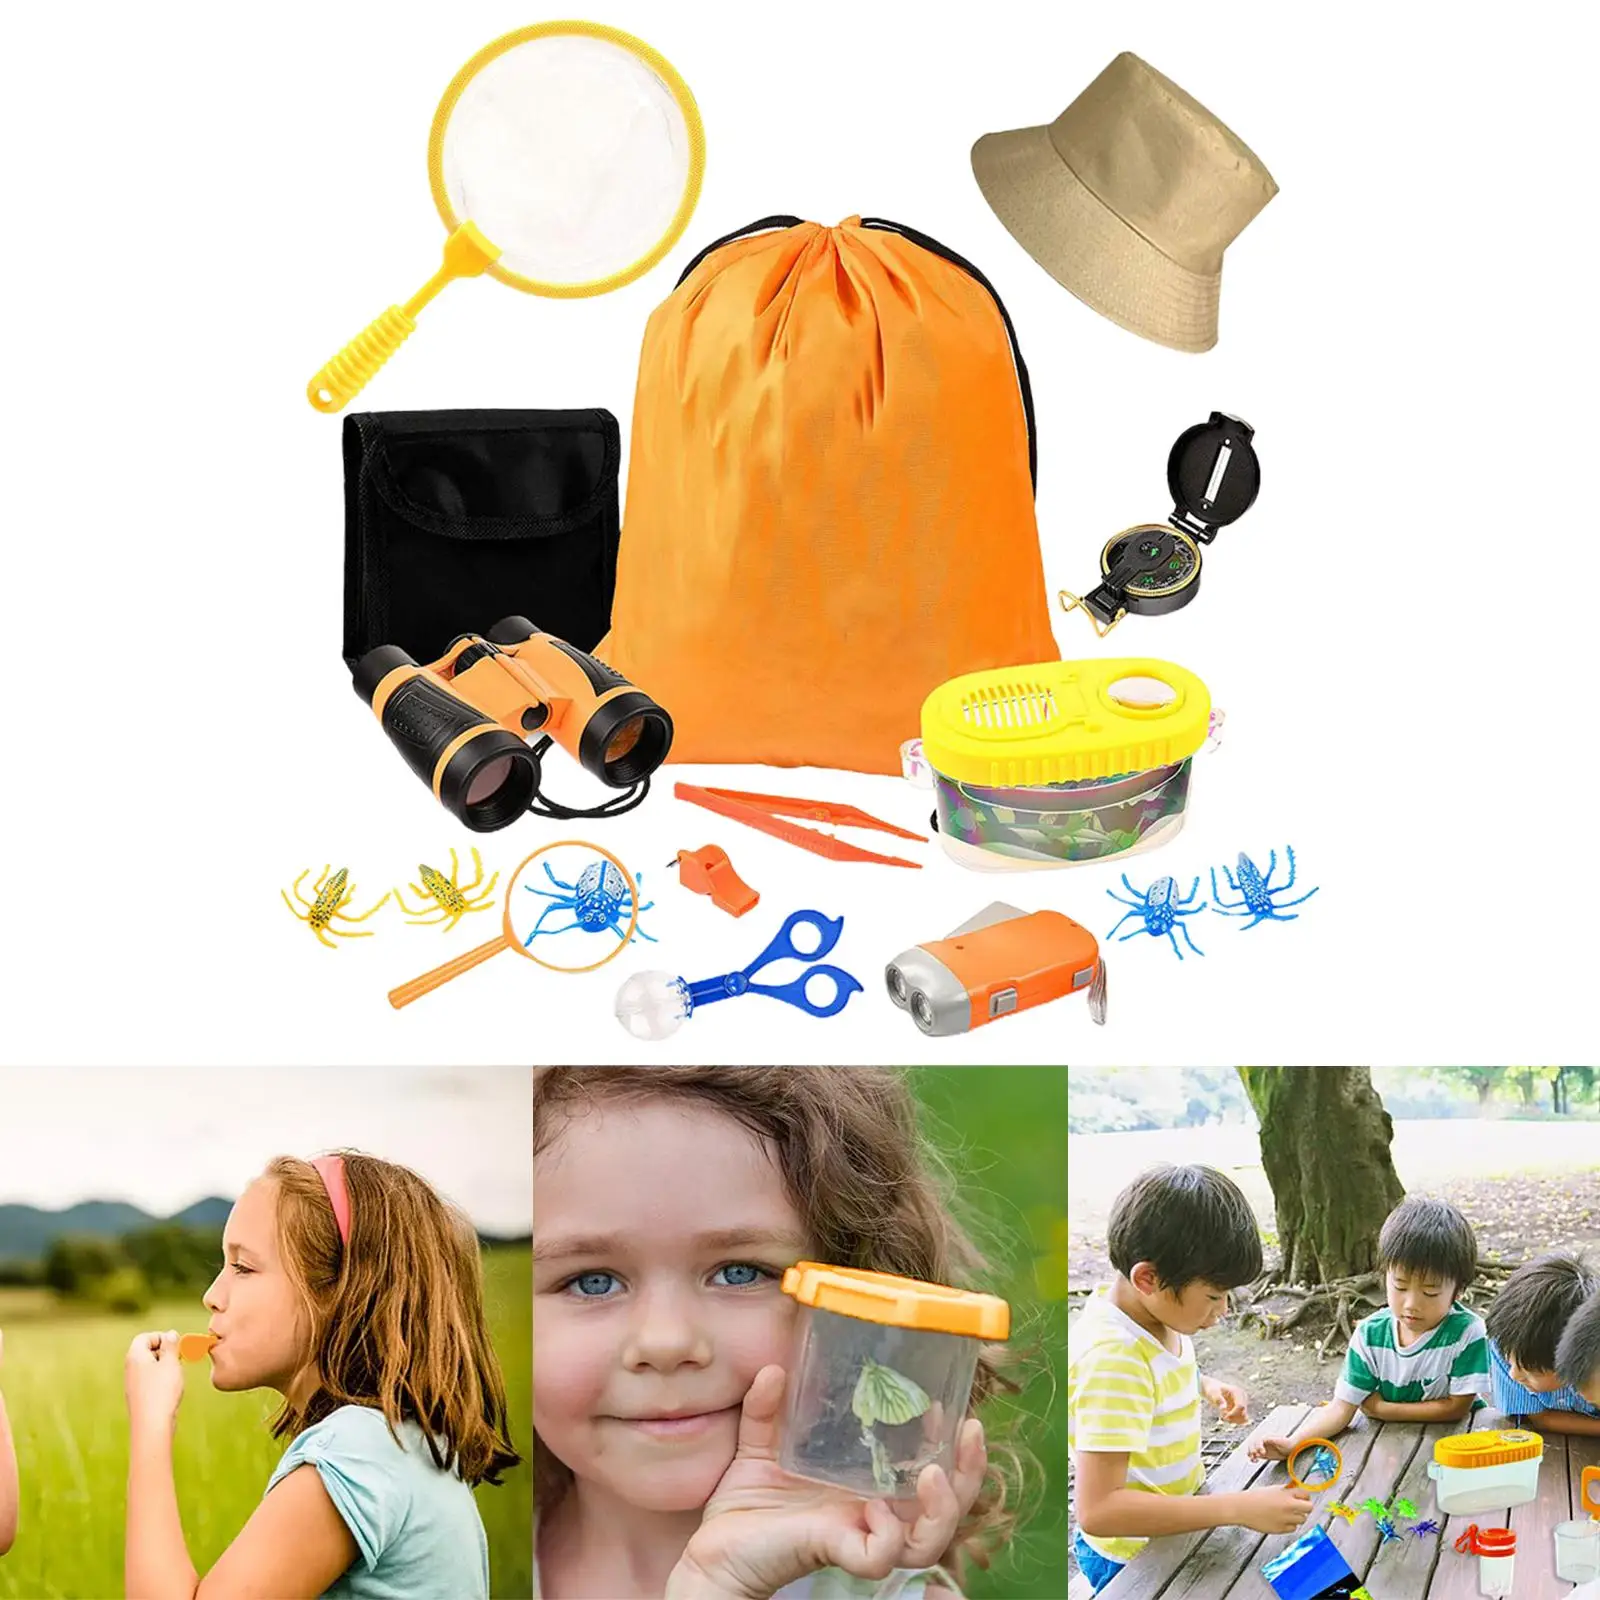 21 Pieces Bug Catcher Kits Insect Box Magnifying Glass Butterfly Net Backpack Compass Outdoor Explorer Bug Collection for Kids